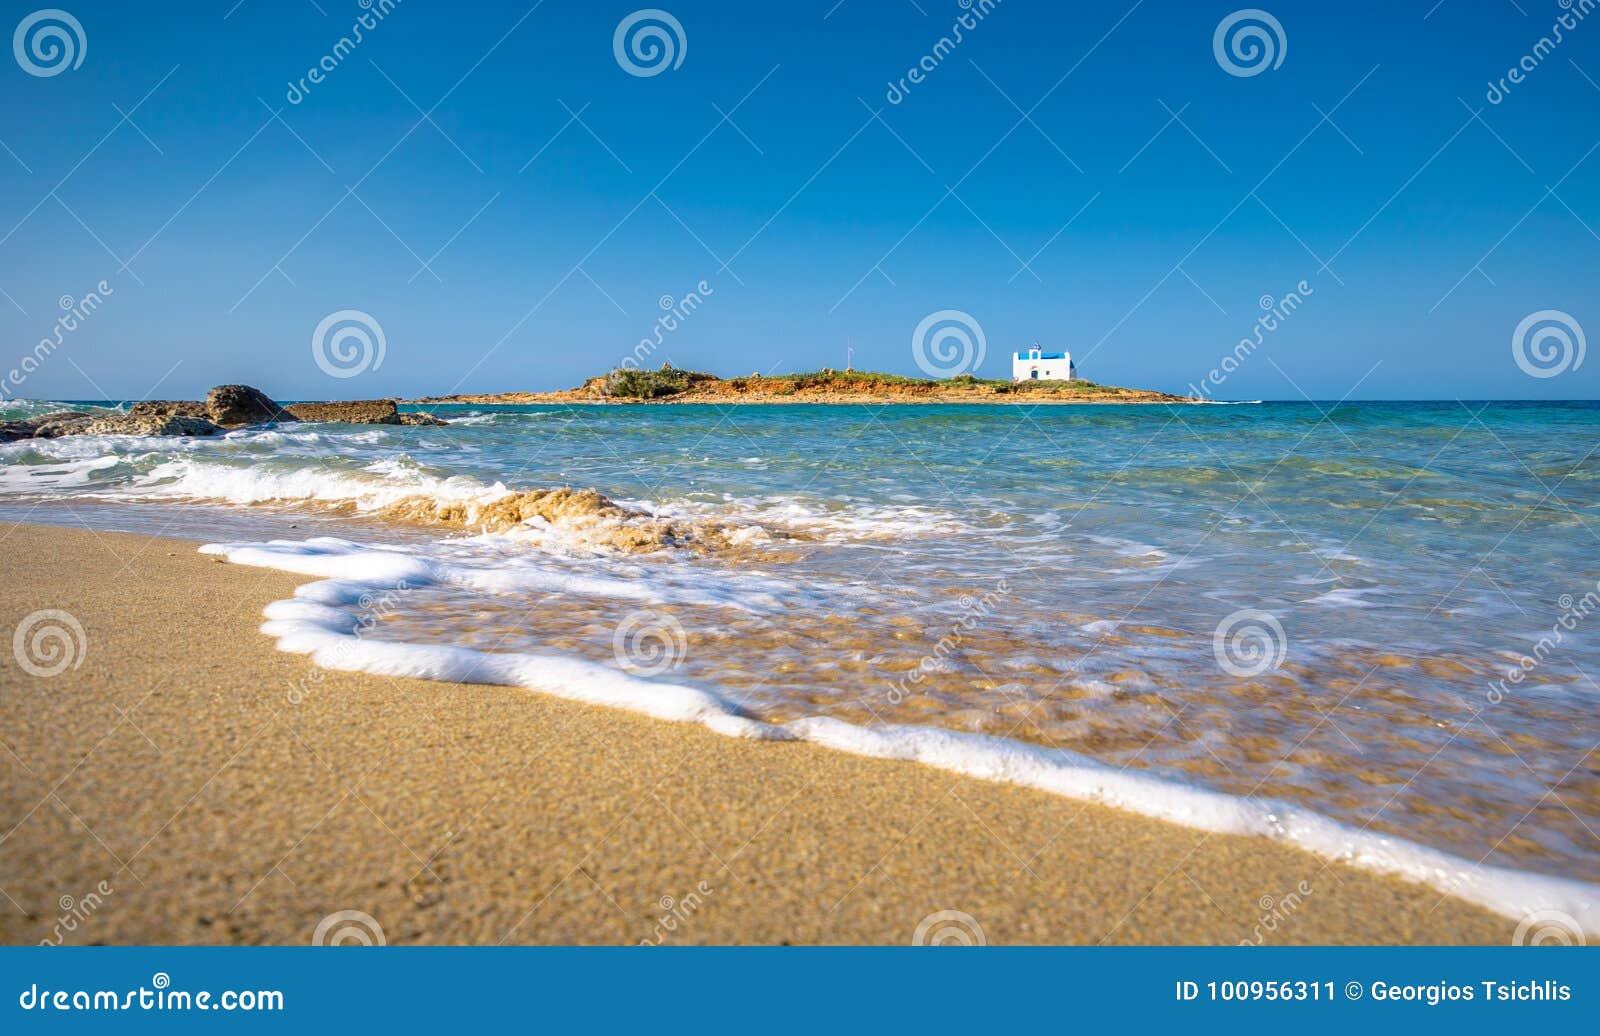 typical summer image of an amazing pictorial view of a sandy beach and an old white church in a small isl